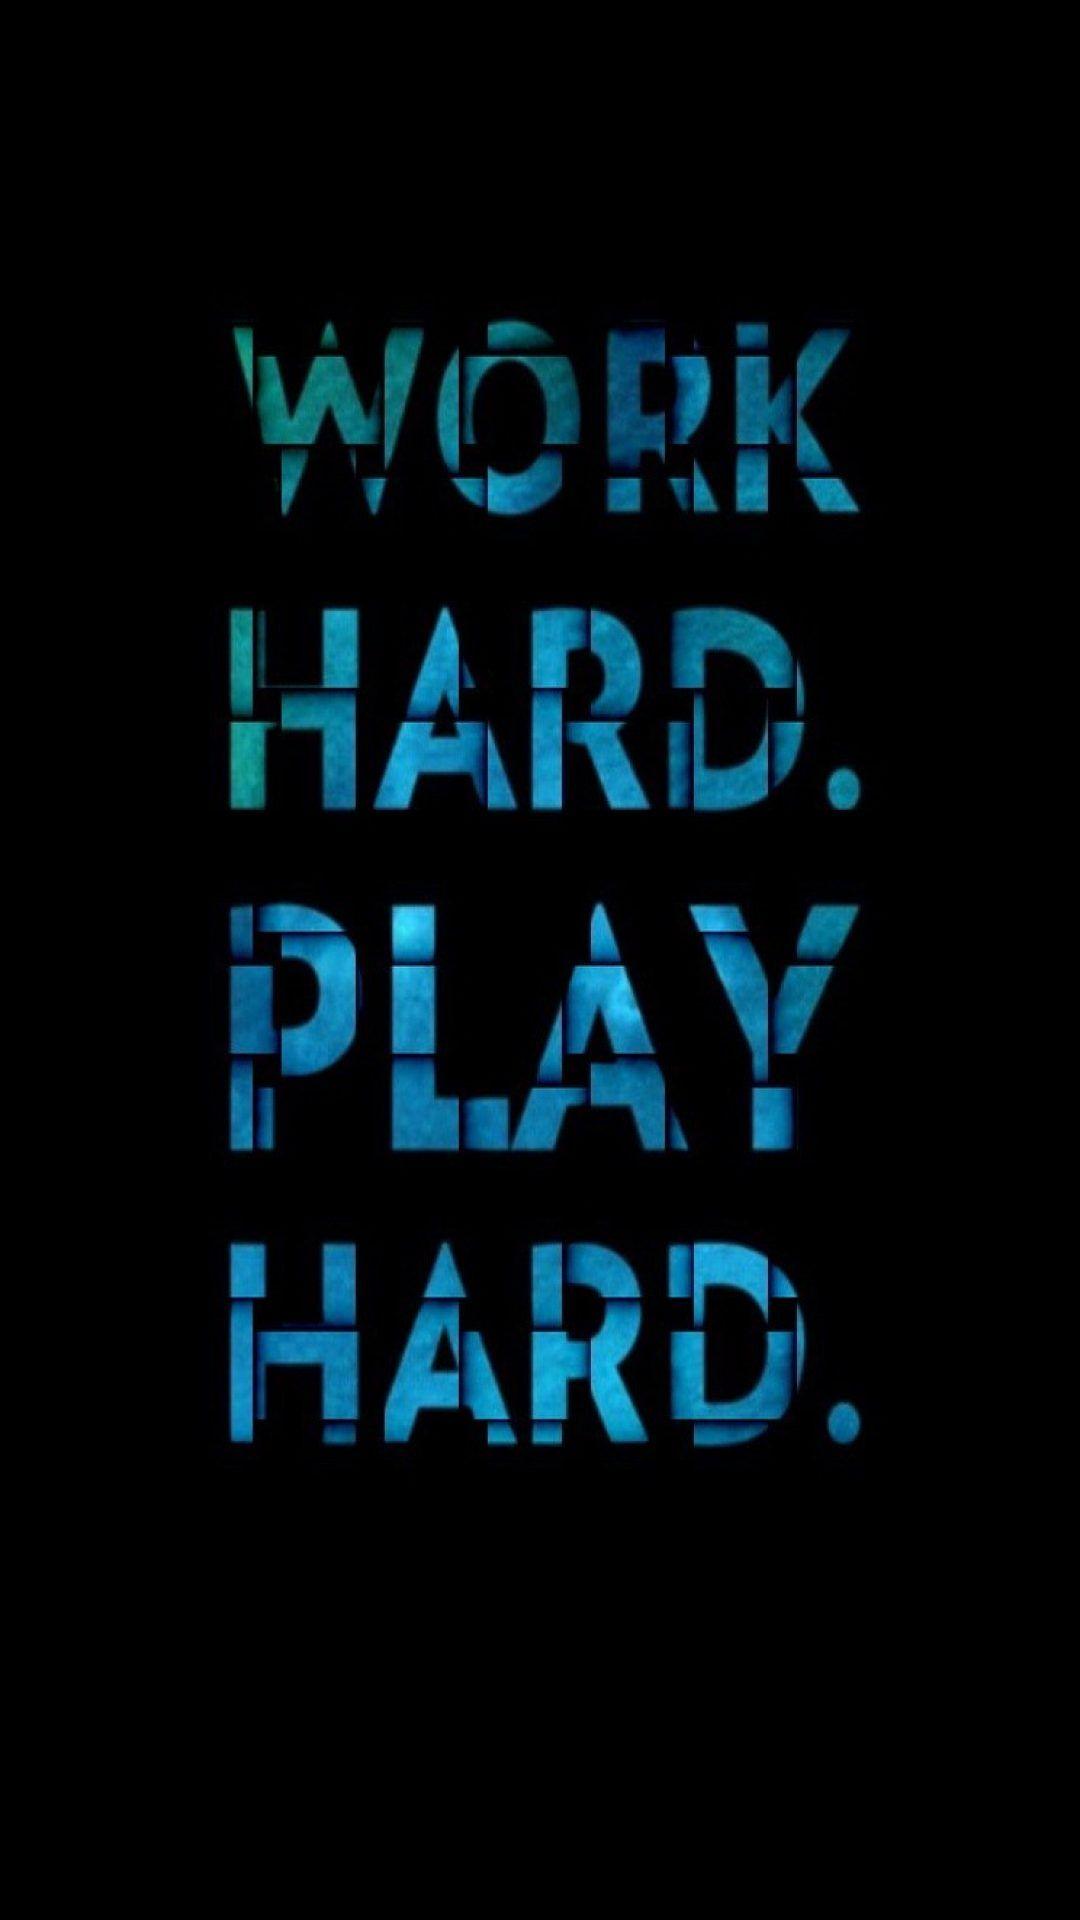 Inspirational Quotes Wallpaper for Mobile (6 of 20) Hard Play Hard Wallpaper. Wallpaper Download. High Resolution Wallpaper. Inspirational quotes wallpaper, Wallpaper quotes, Quote iphone